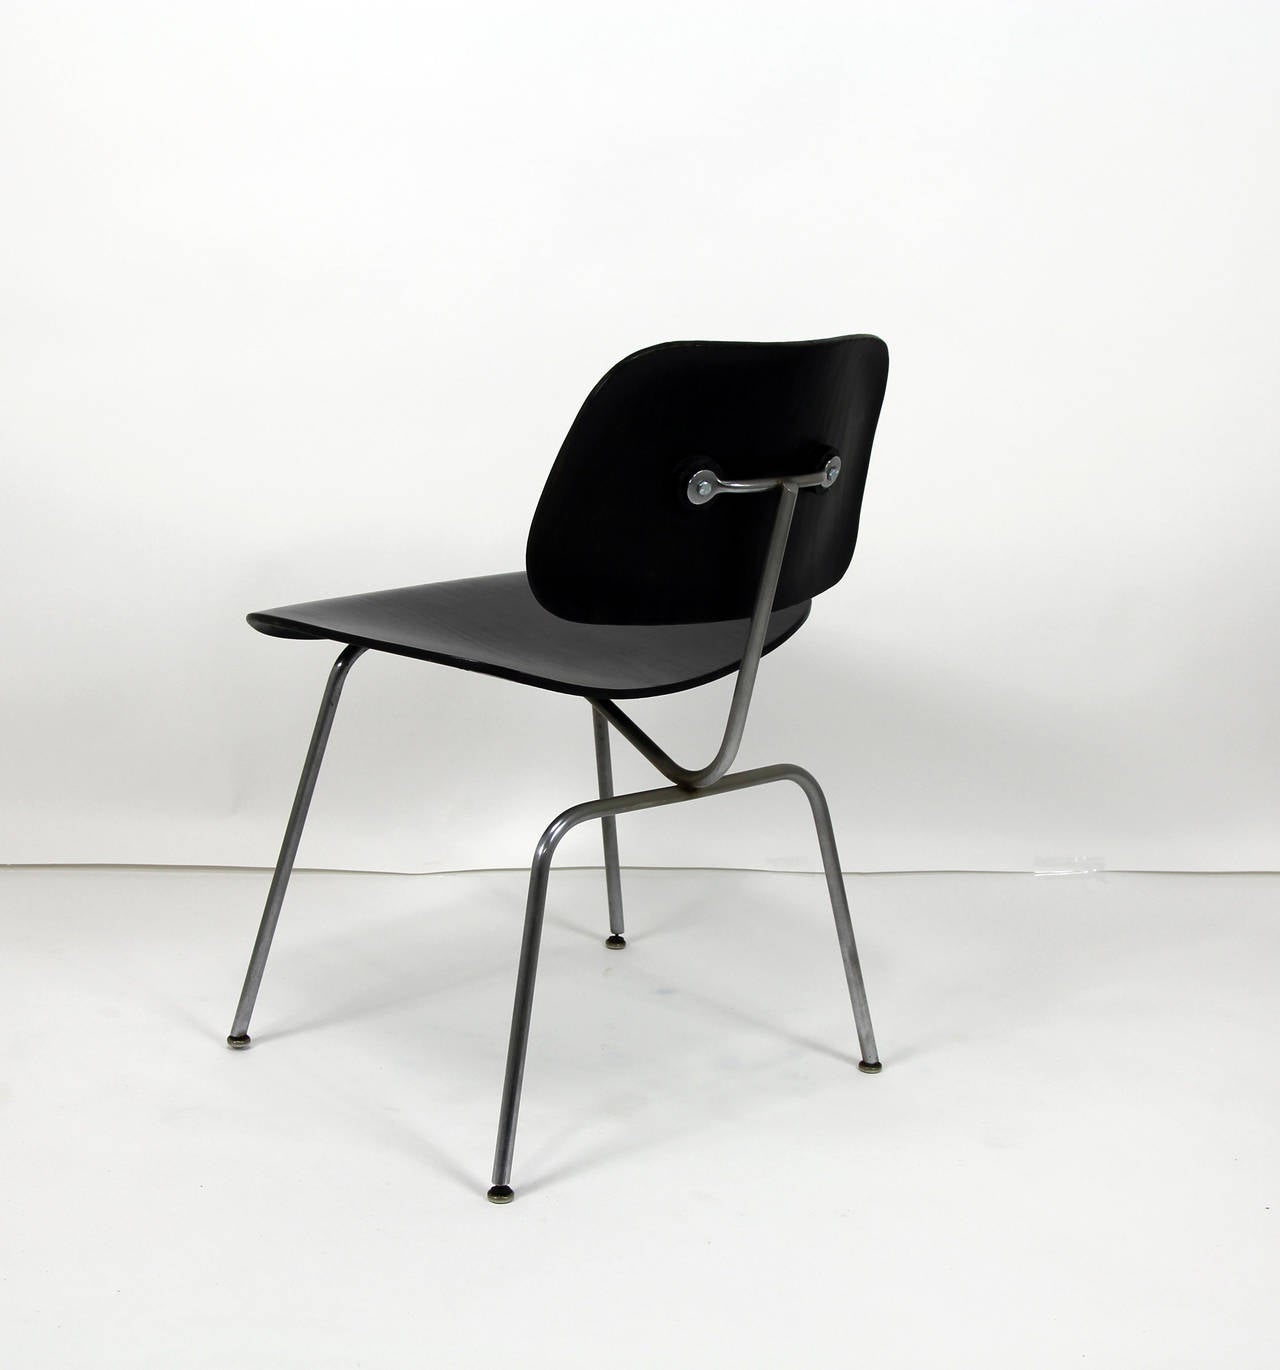 American Set of Four Herman Miller Eames DCM Chairs in Ebony Finish For Sale